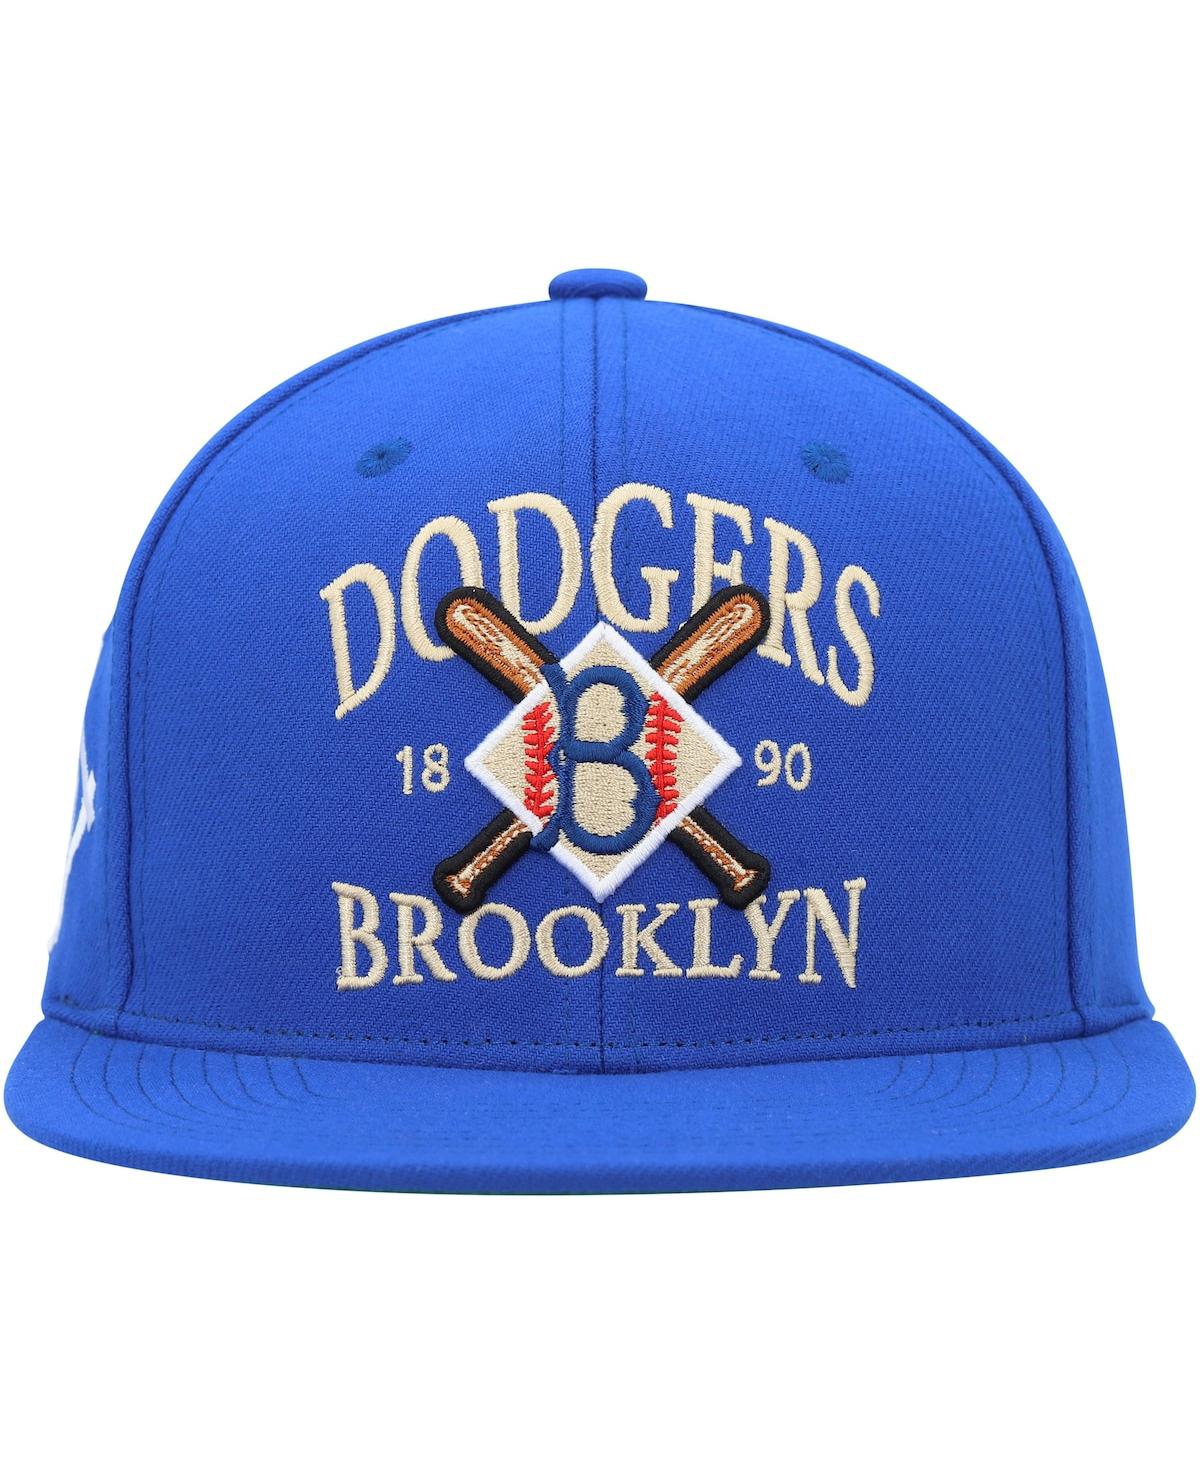 Brooklyn Dodgers Cooperstown Collection Hat